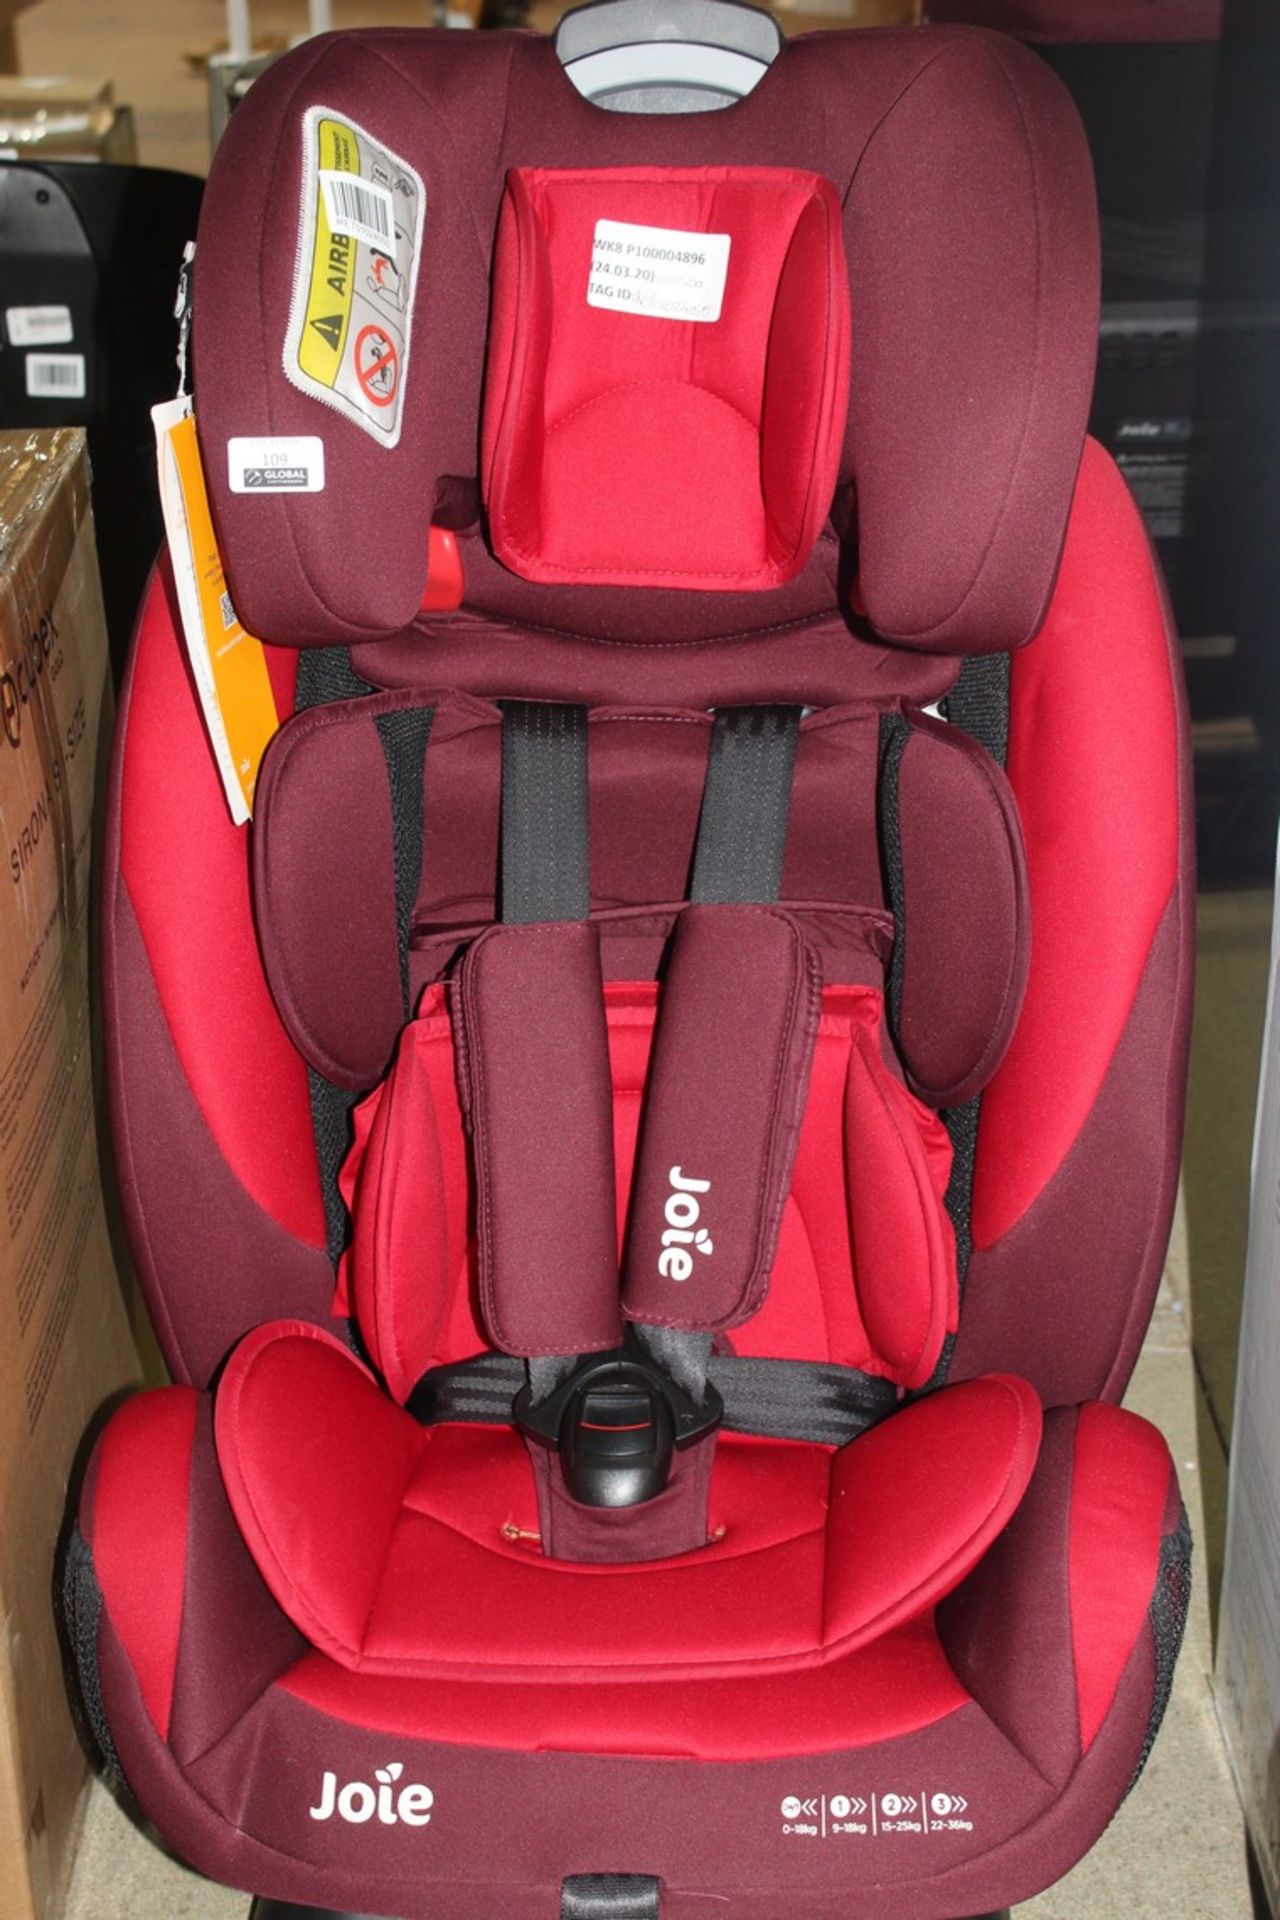 Joie In Car Safety Seat RRP £55 (RET01024050) (Appraisals Available)